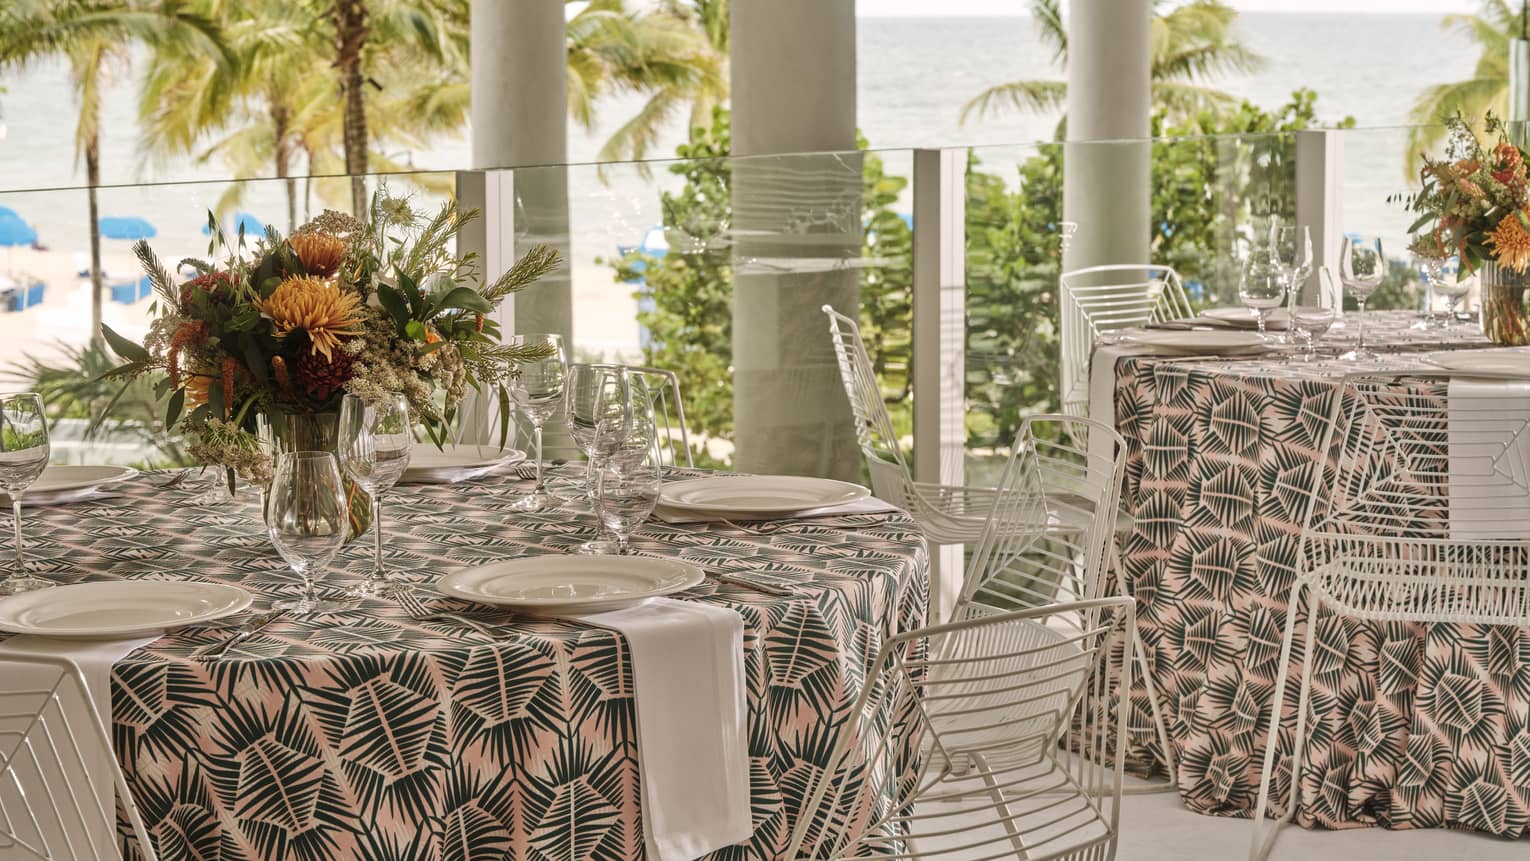 Round tables with table settings outside near a beach with palm trees.